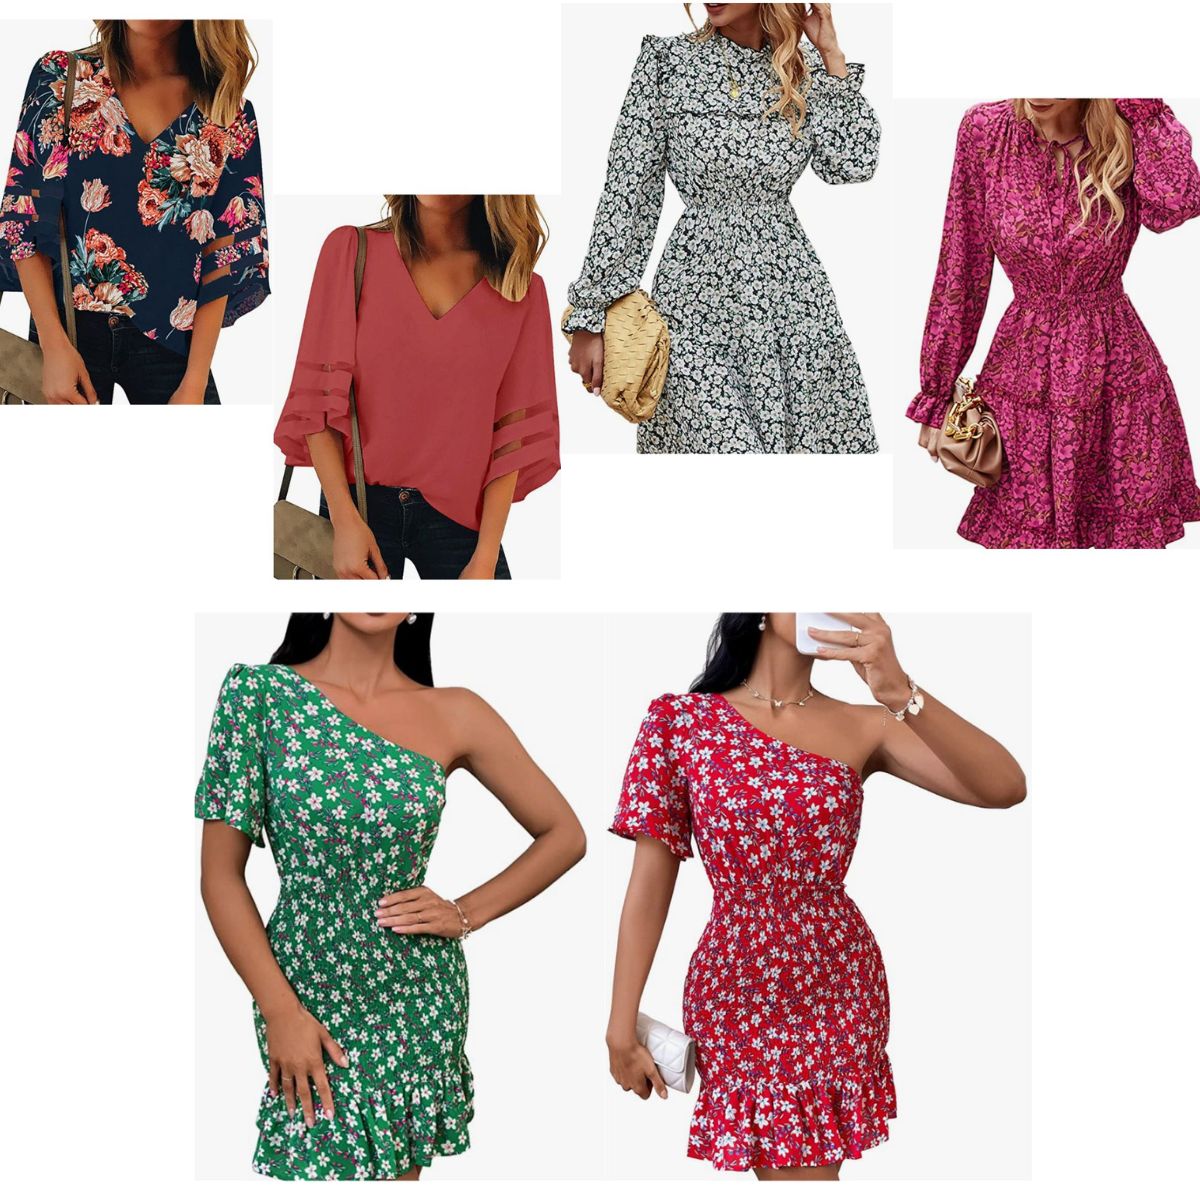 Sweet deals on dresses and blouses